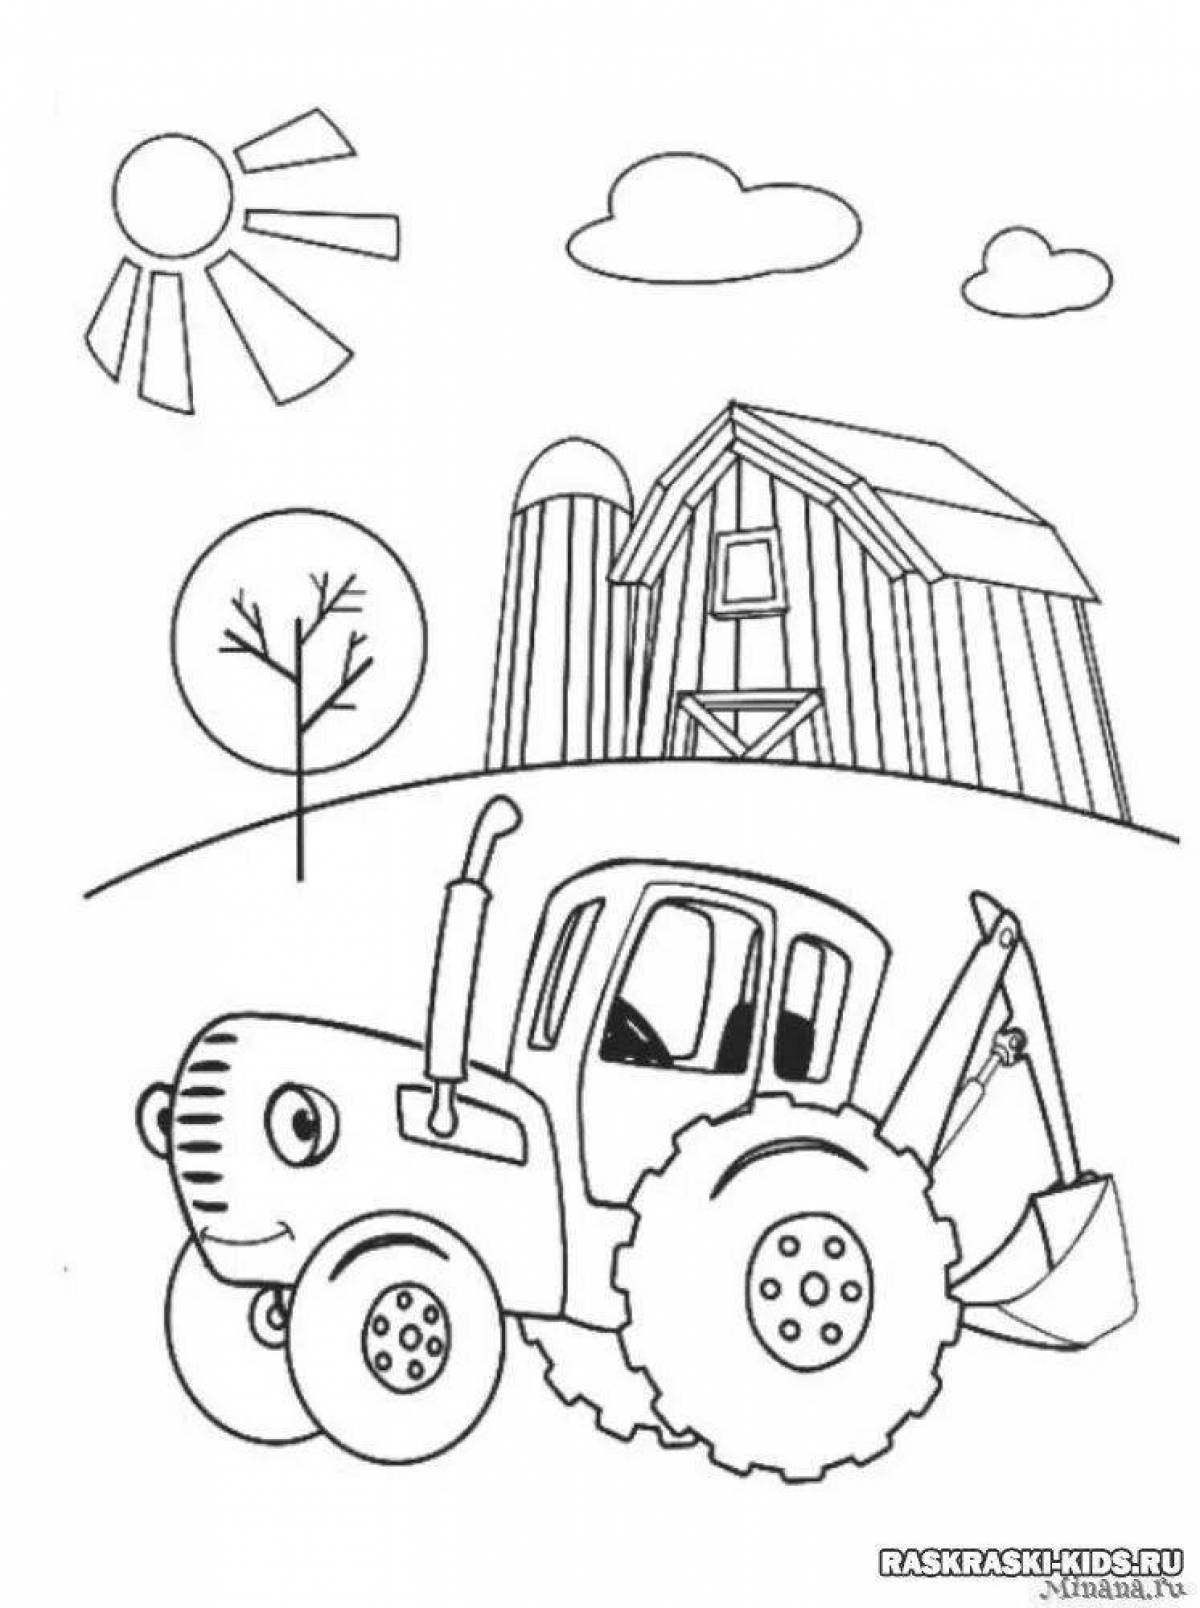 Refined house, blue tractor, coloring book